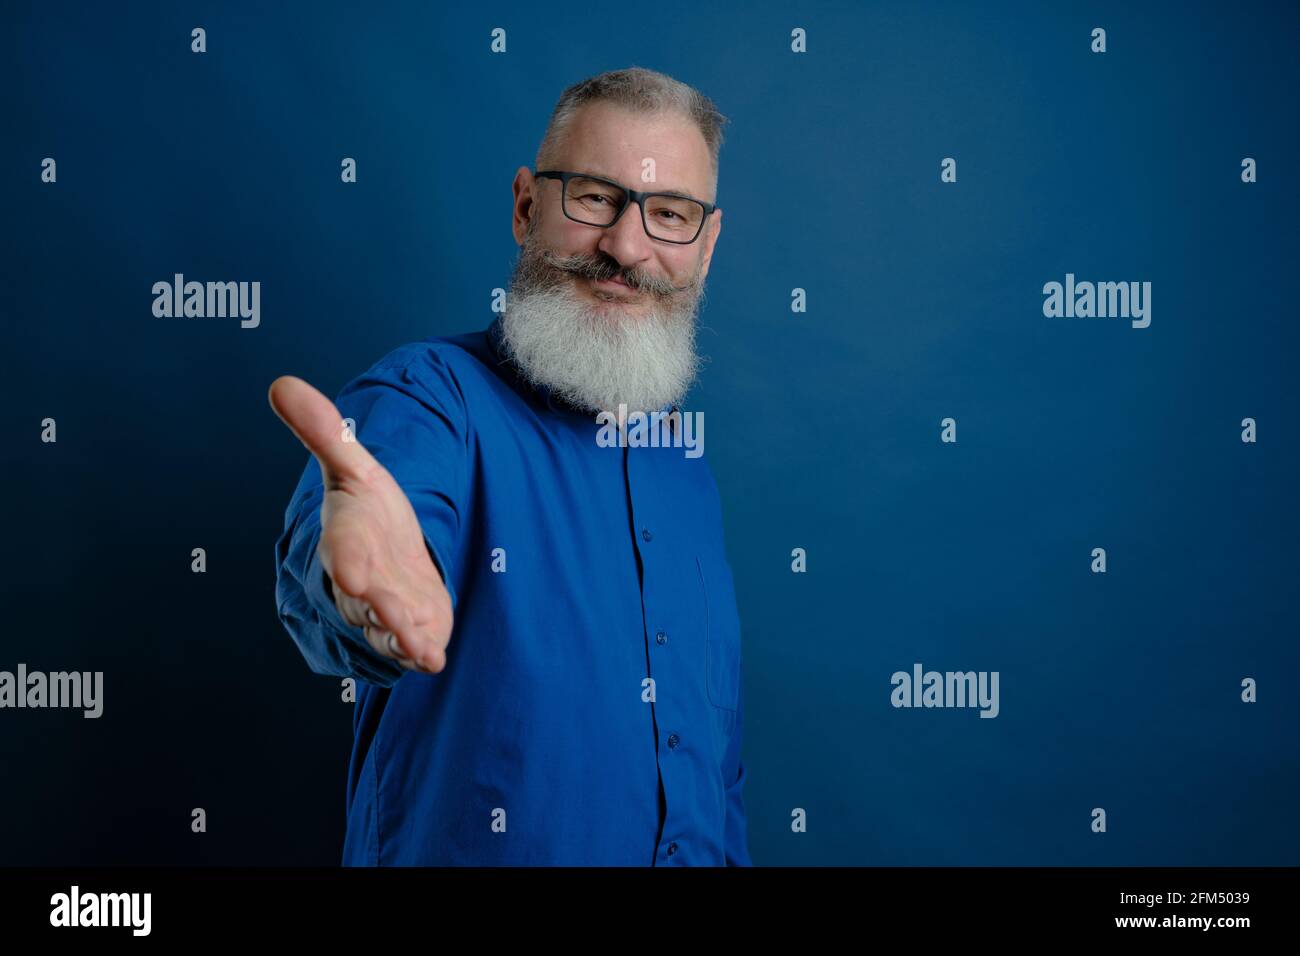 Mature bearded caucasian man holds out his hand to say hello. Friendly grayhaired bearded senior man dressed blue shirt makes greeting gesture over bl Stock Photo